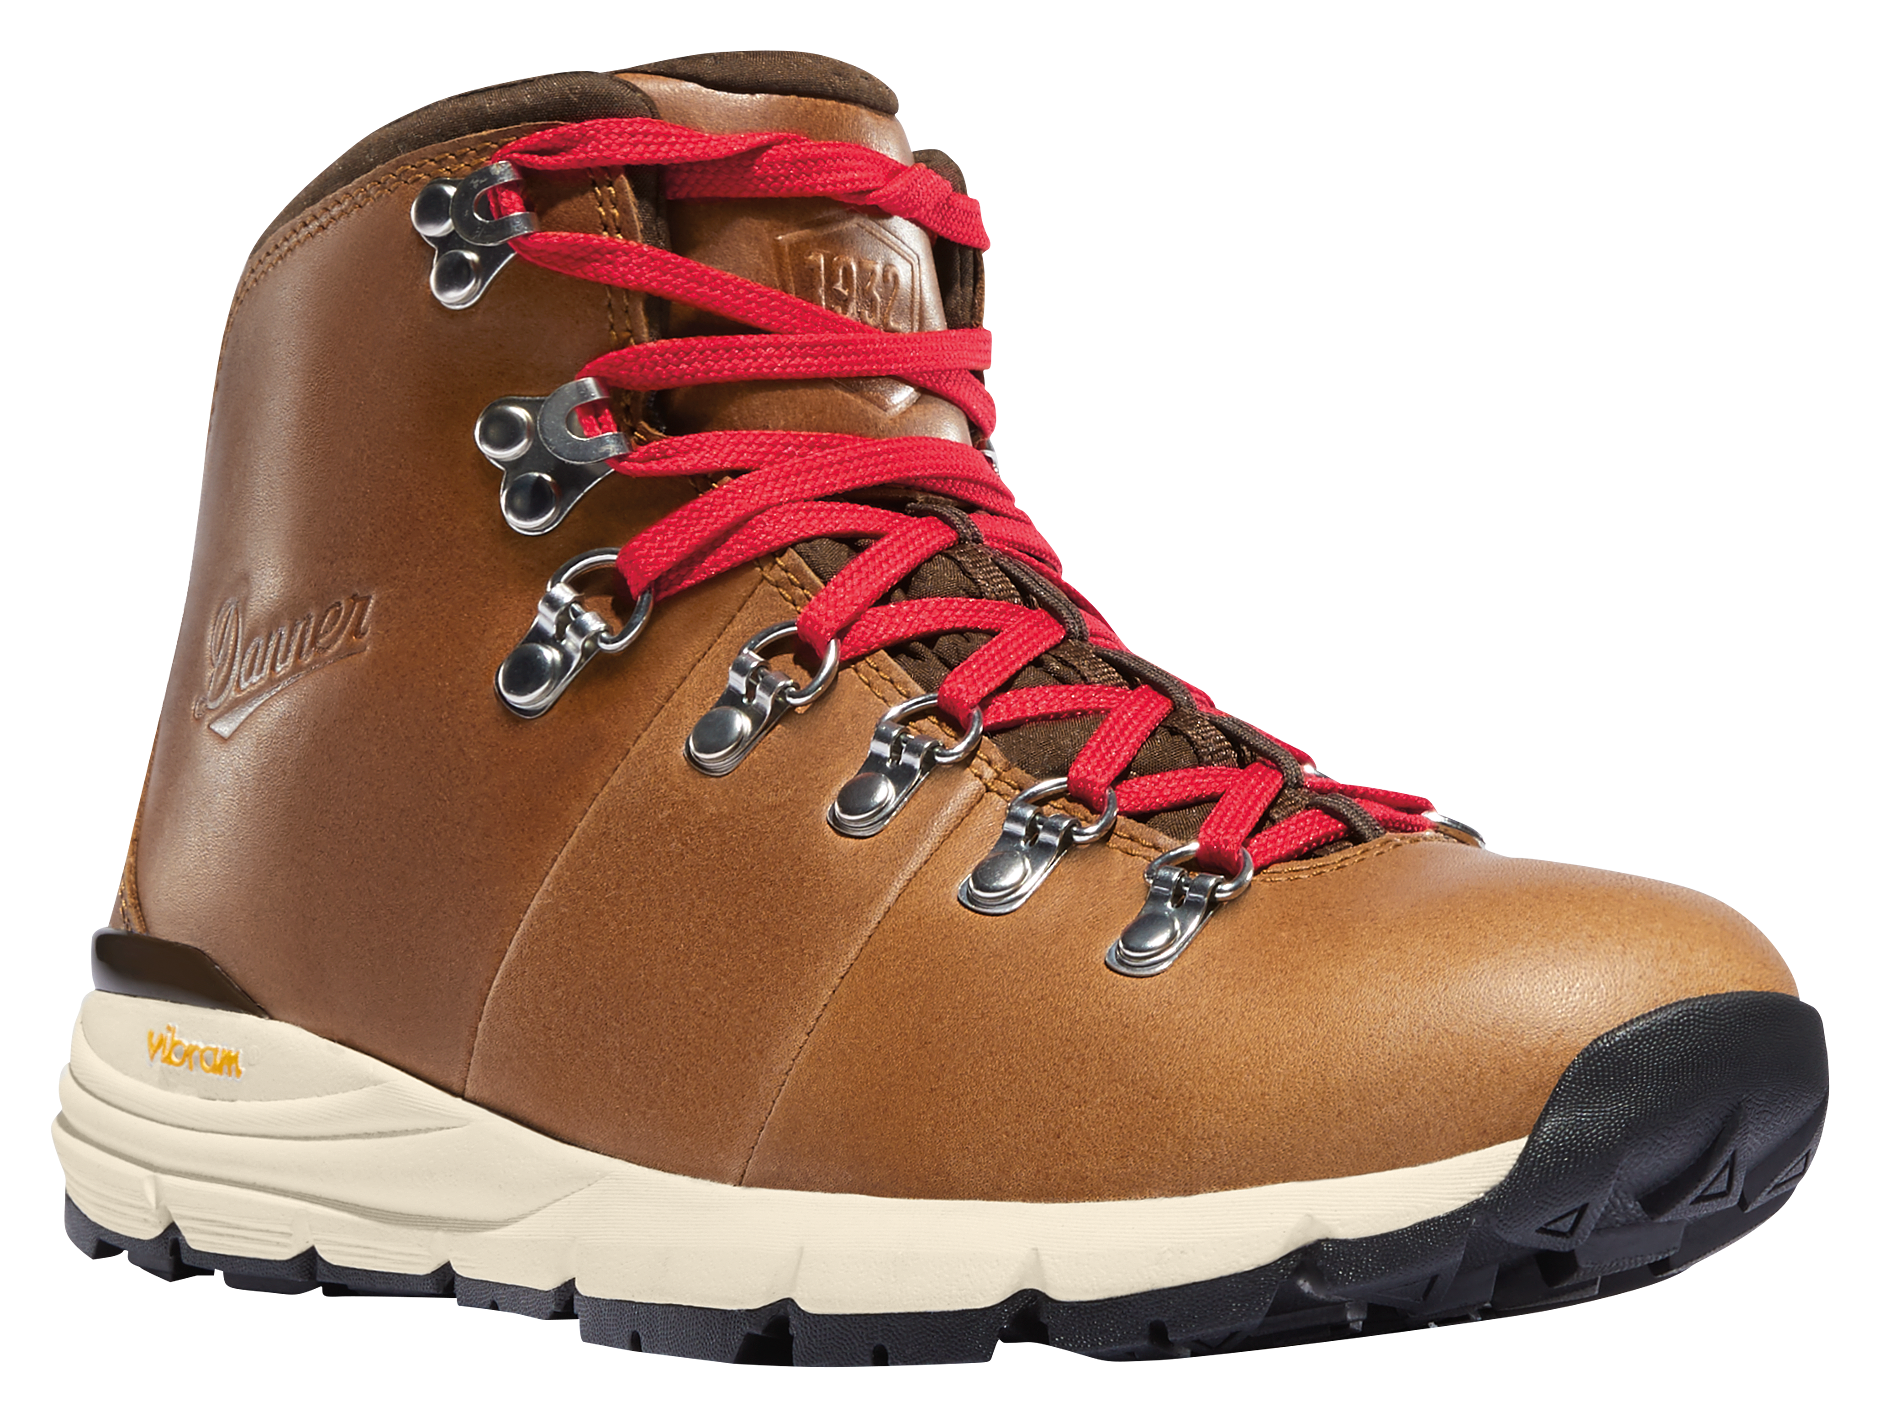 Danner Mountain 600 Leather Waterproof Hiking Boots for Ladies - Saddle Tan - 6.5M